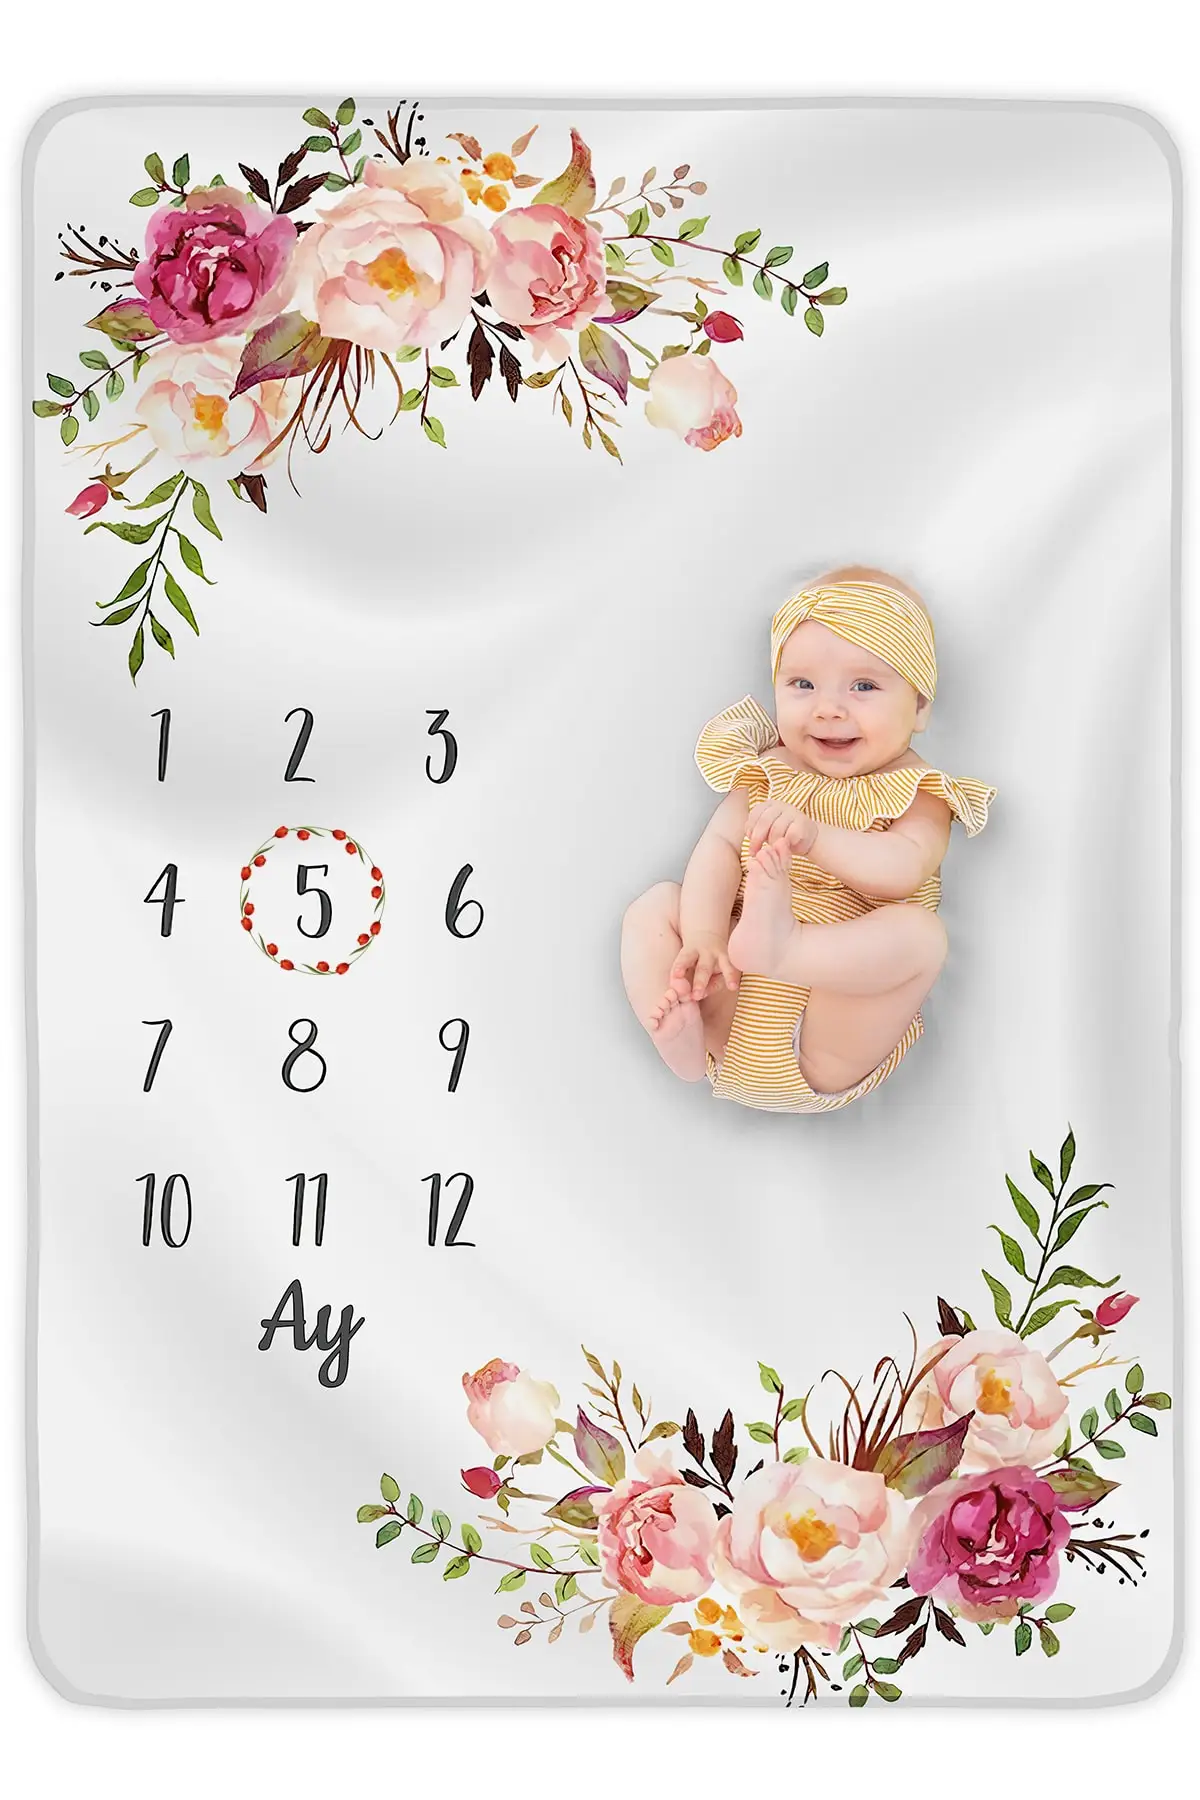 Baby memory blanket, newborn monthly concept photo shooting blanket 150x cm, gift Polyester red